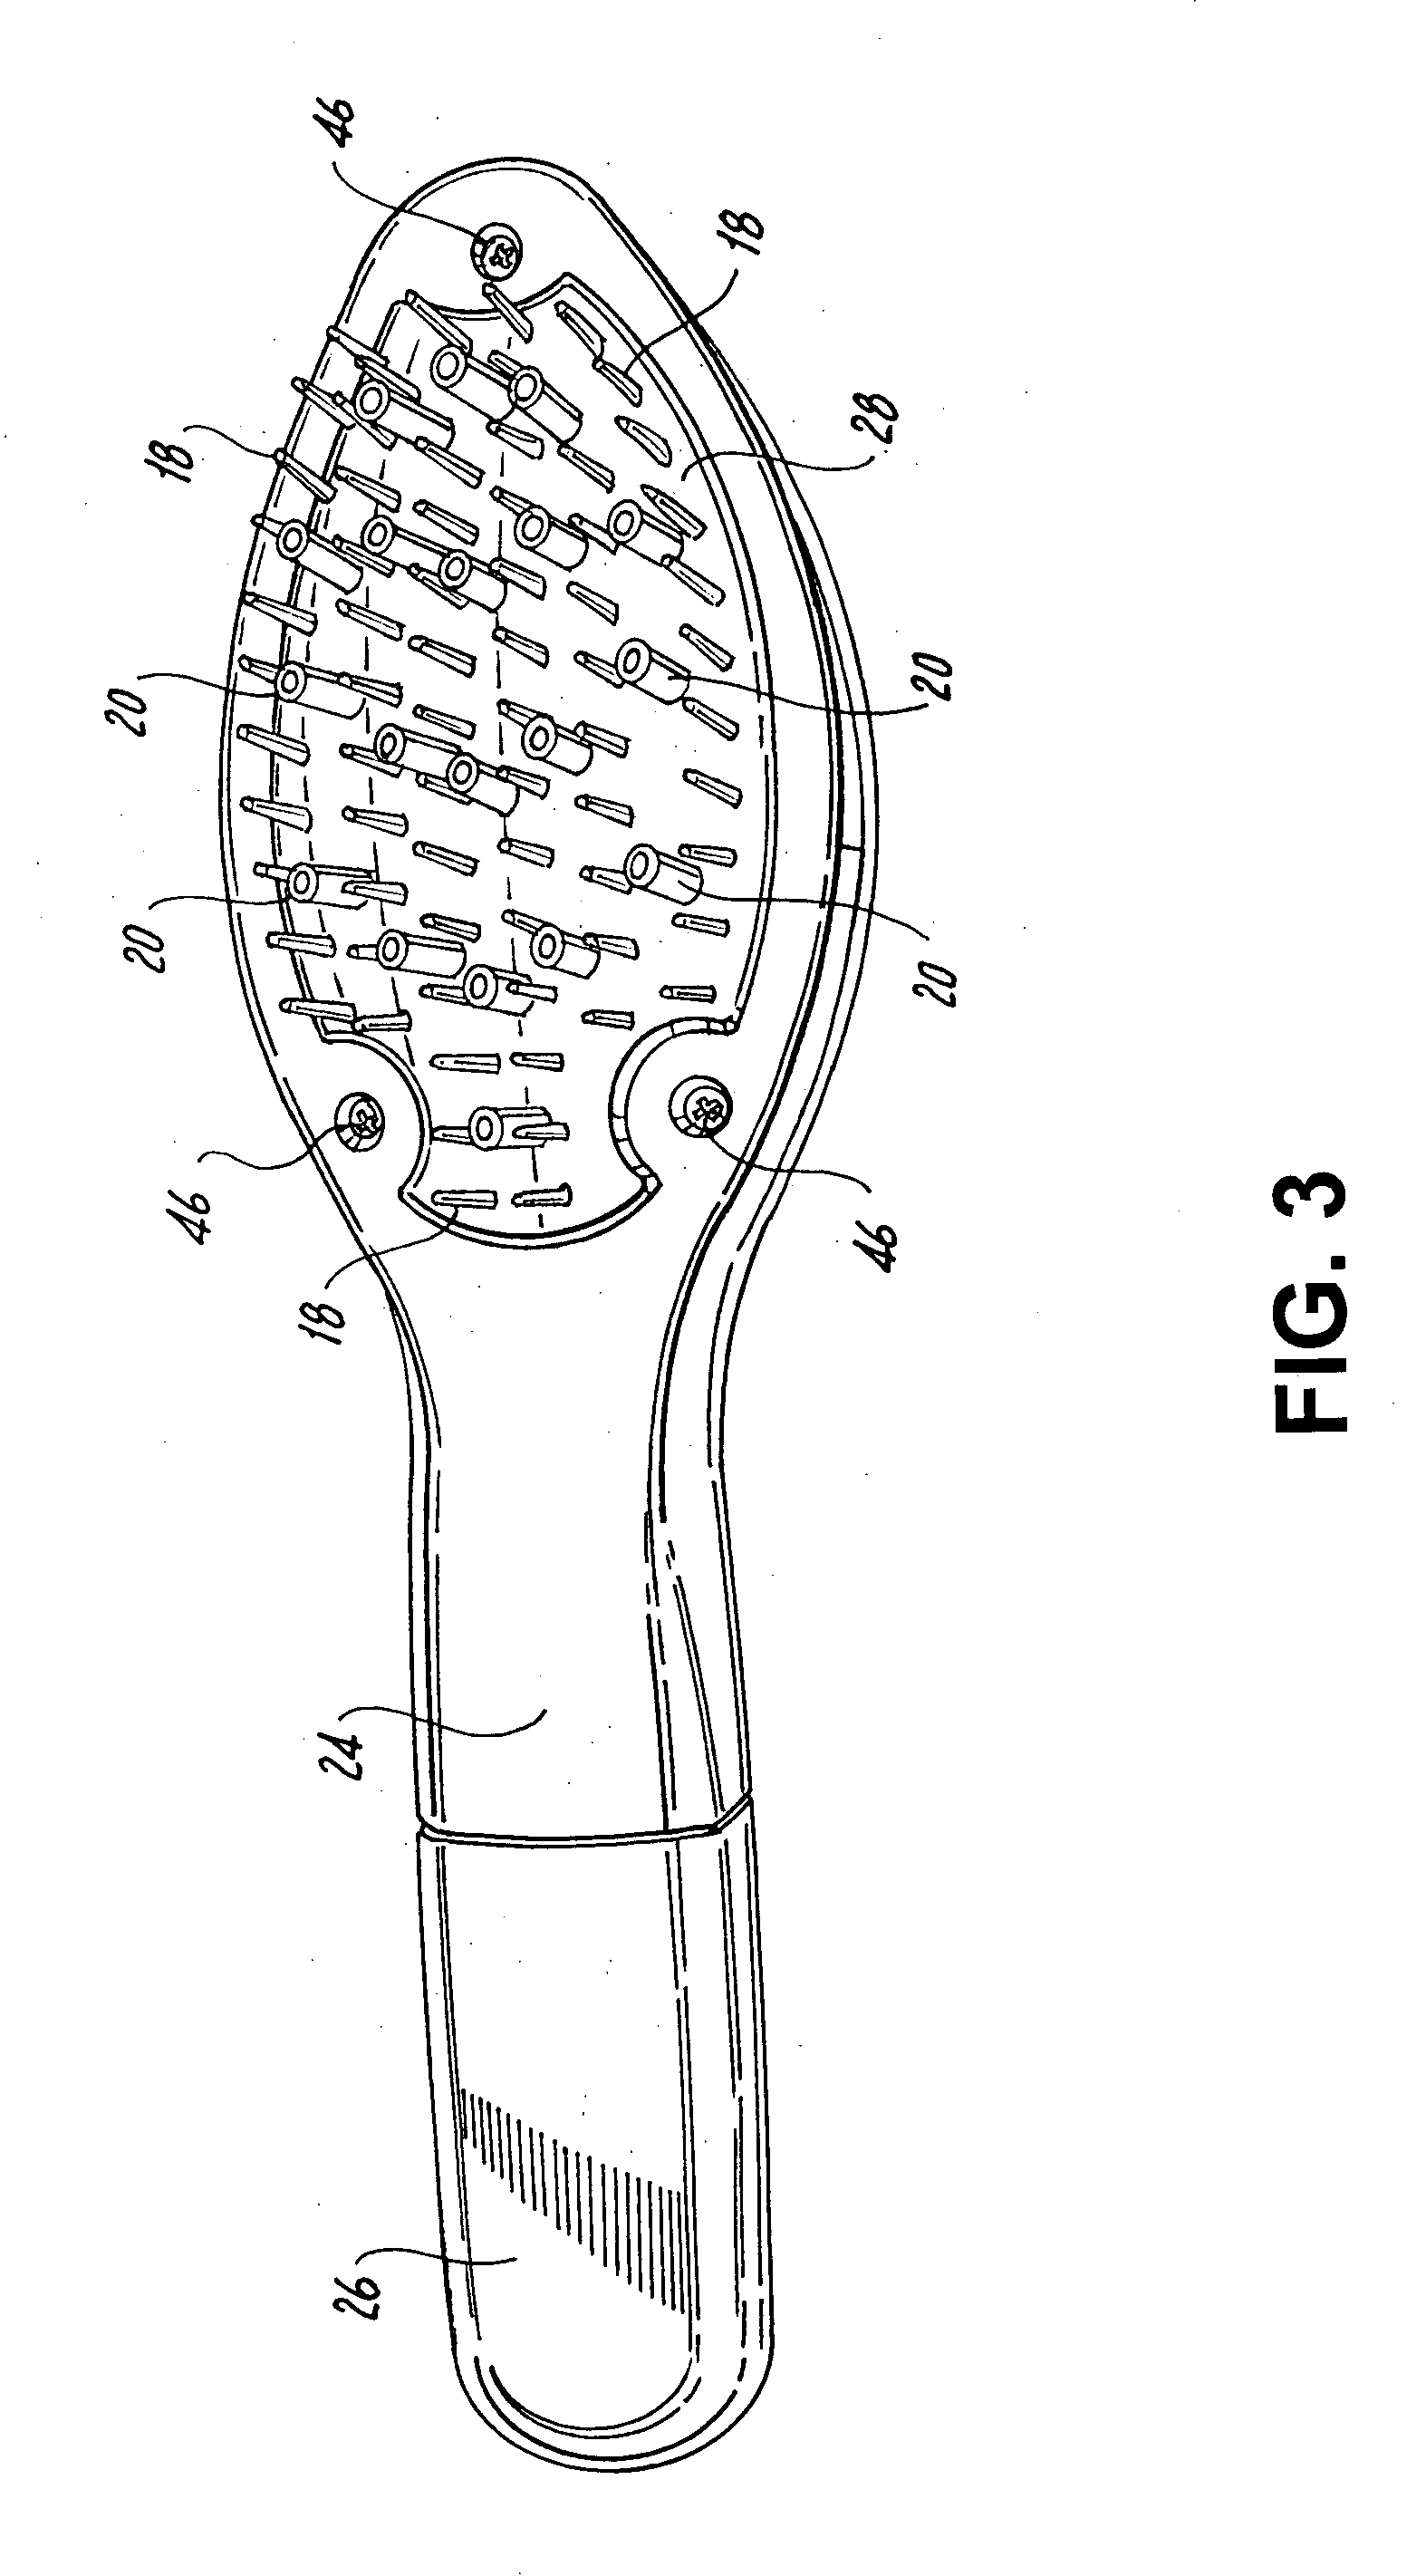 Hair comb, circuitry, and method for laser and galvanic scalp treatment